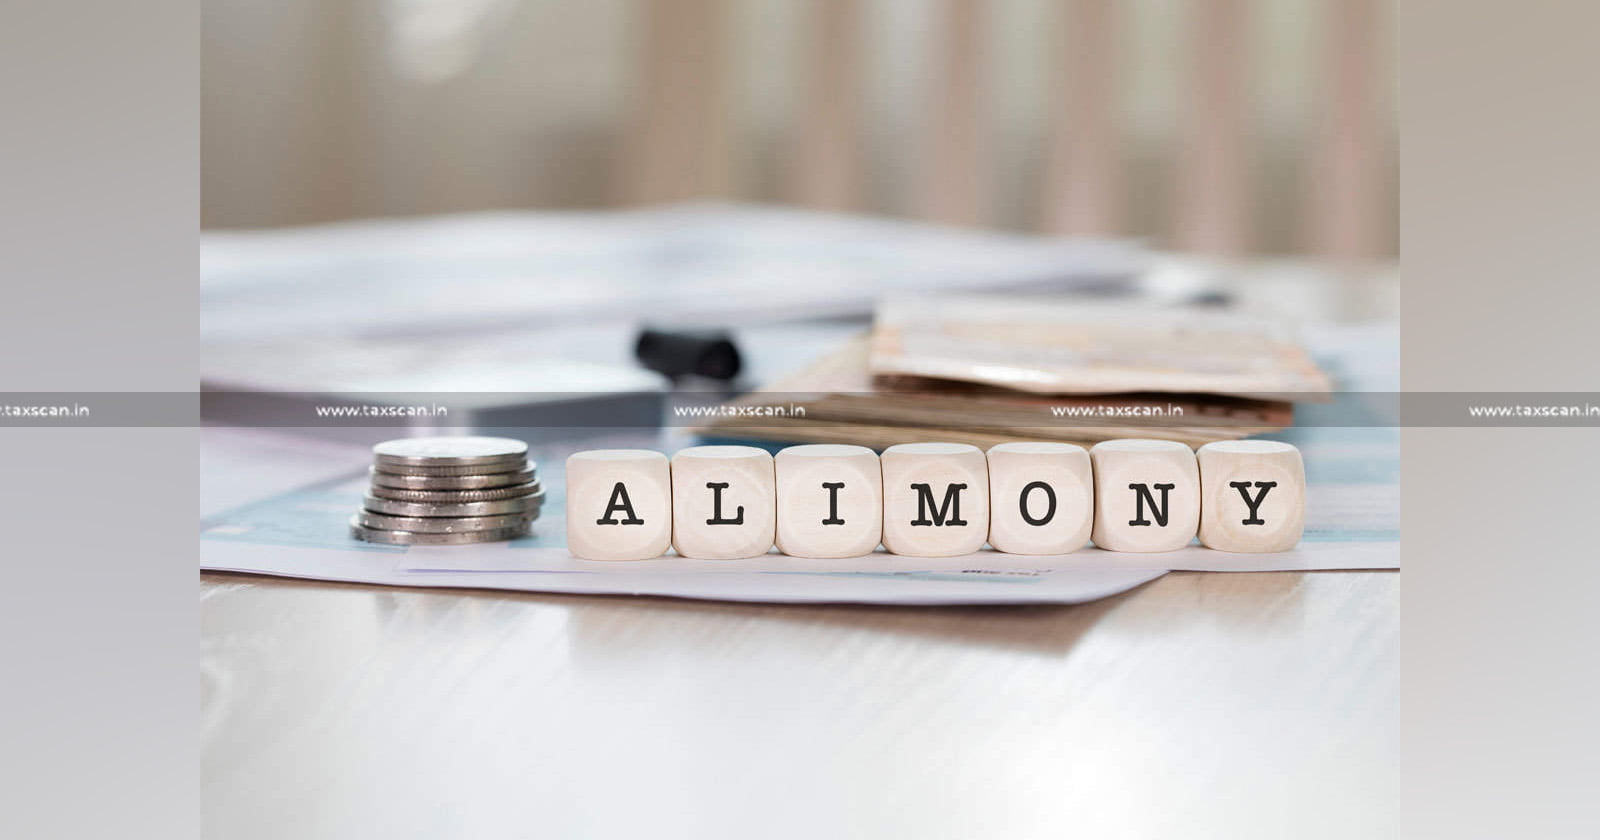 Alimony Received on Divorce is not Unexplained Cash Credit - Alimony Received on Divorce - Alimony - Unexplained Cash Credit - ITAT - Taxscan